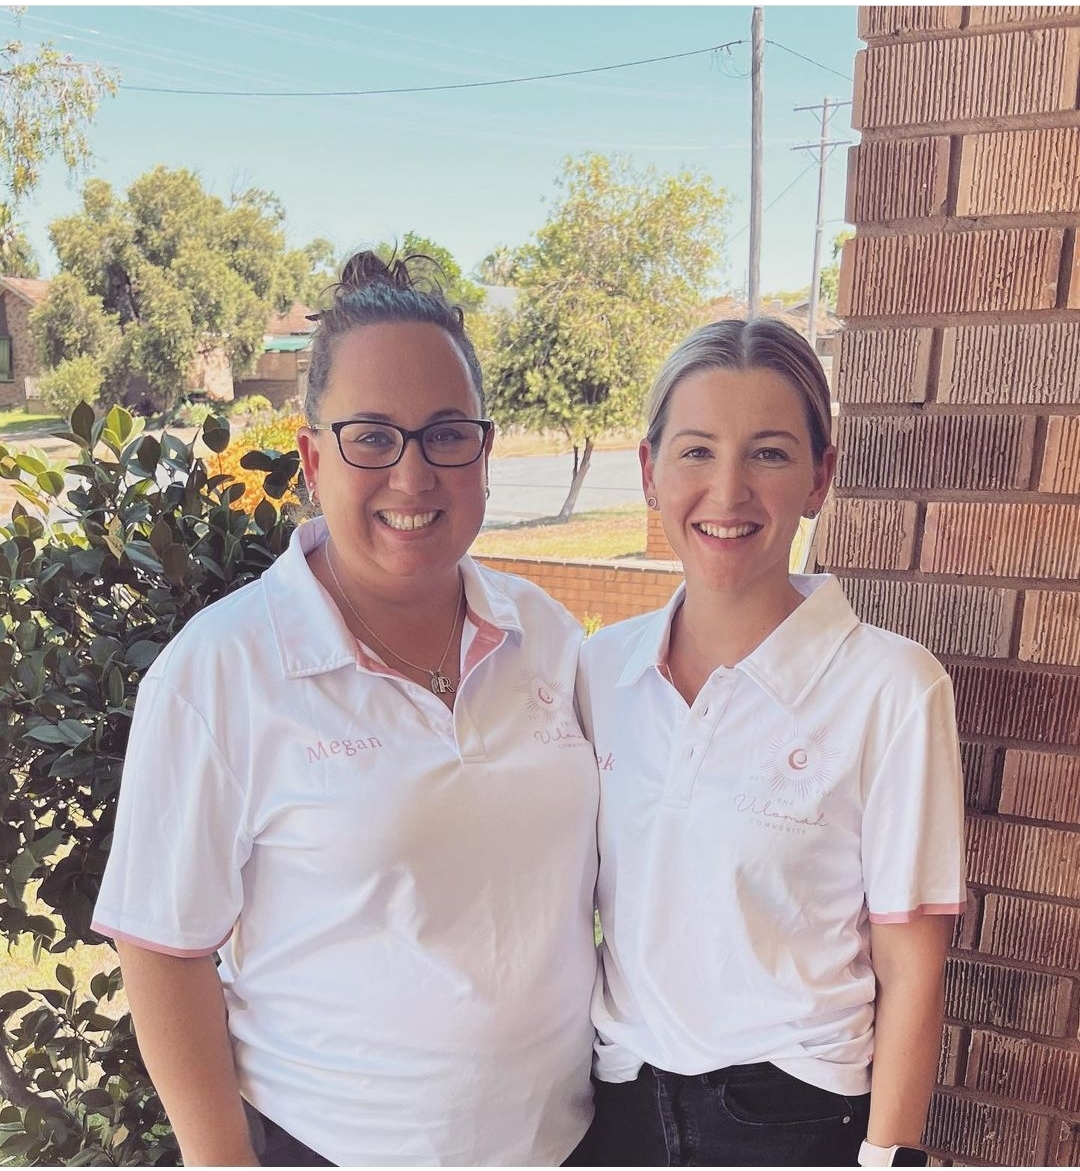 Megan Gaffney (left) and Rebekah Post (right), founders of local Wagga not-for-profit The Vilomah Group. Photo: Supplied.